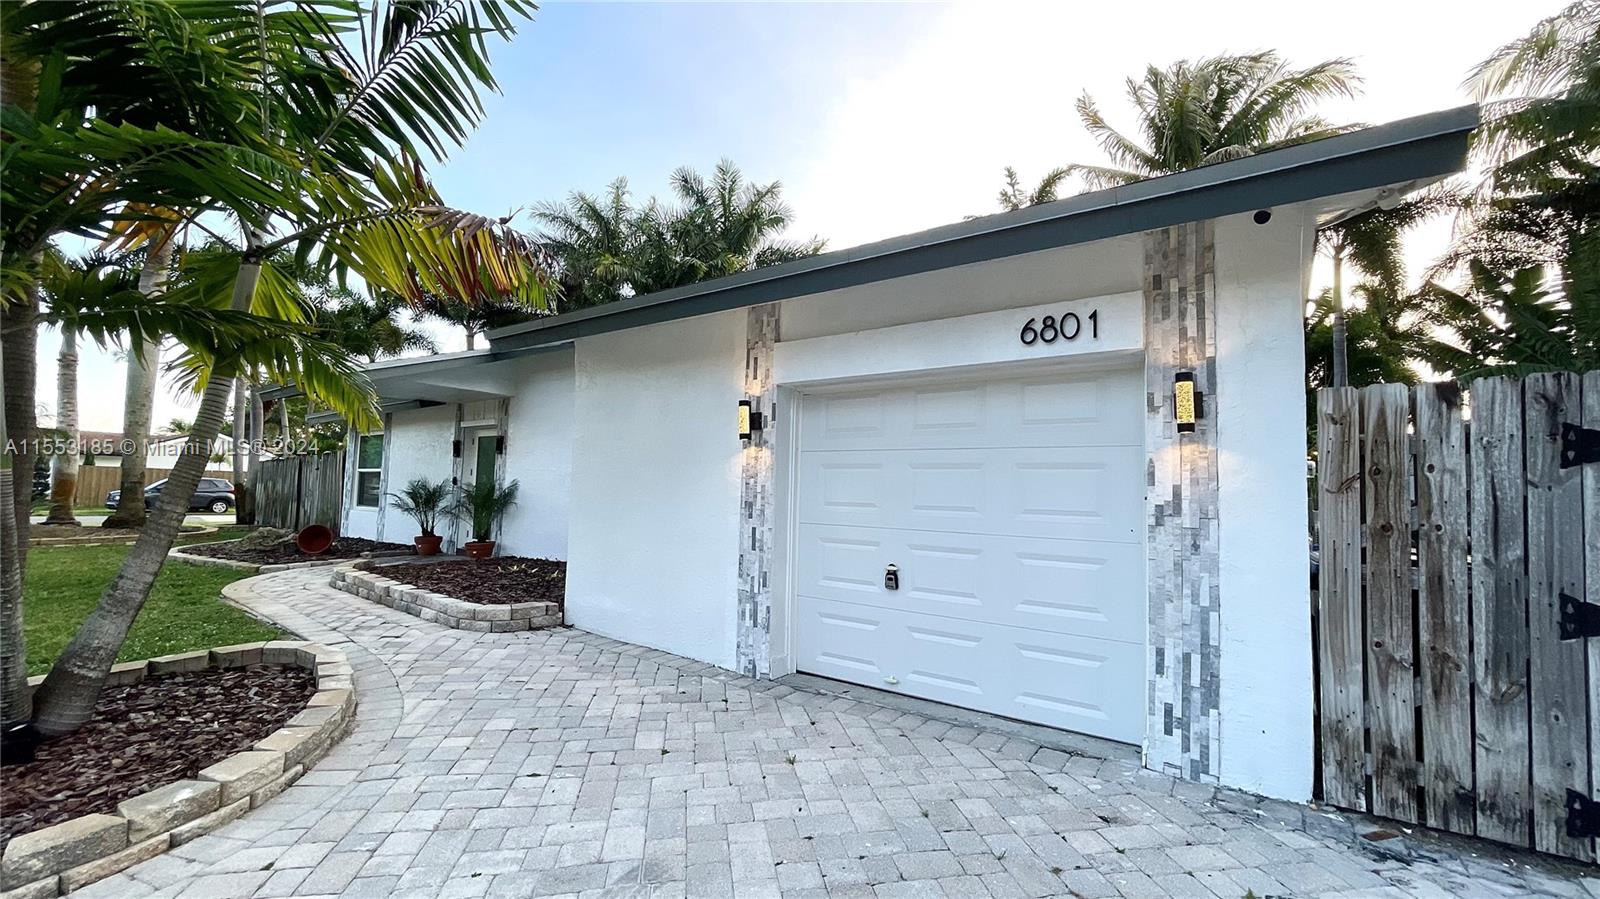 Property for Sale at Address Not Disclosed, Fort Lauderdale, Broward County, Florida - Bedrooms: 3 
Bathrooms: 2  - $649,990